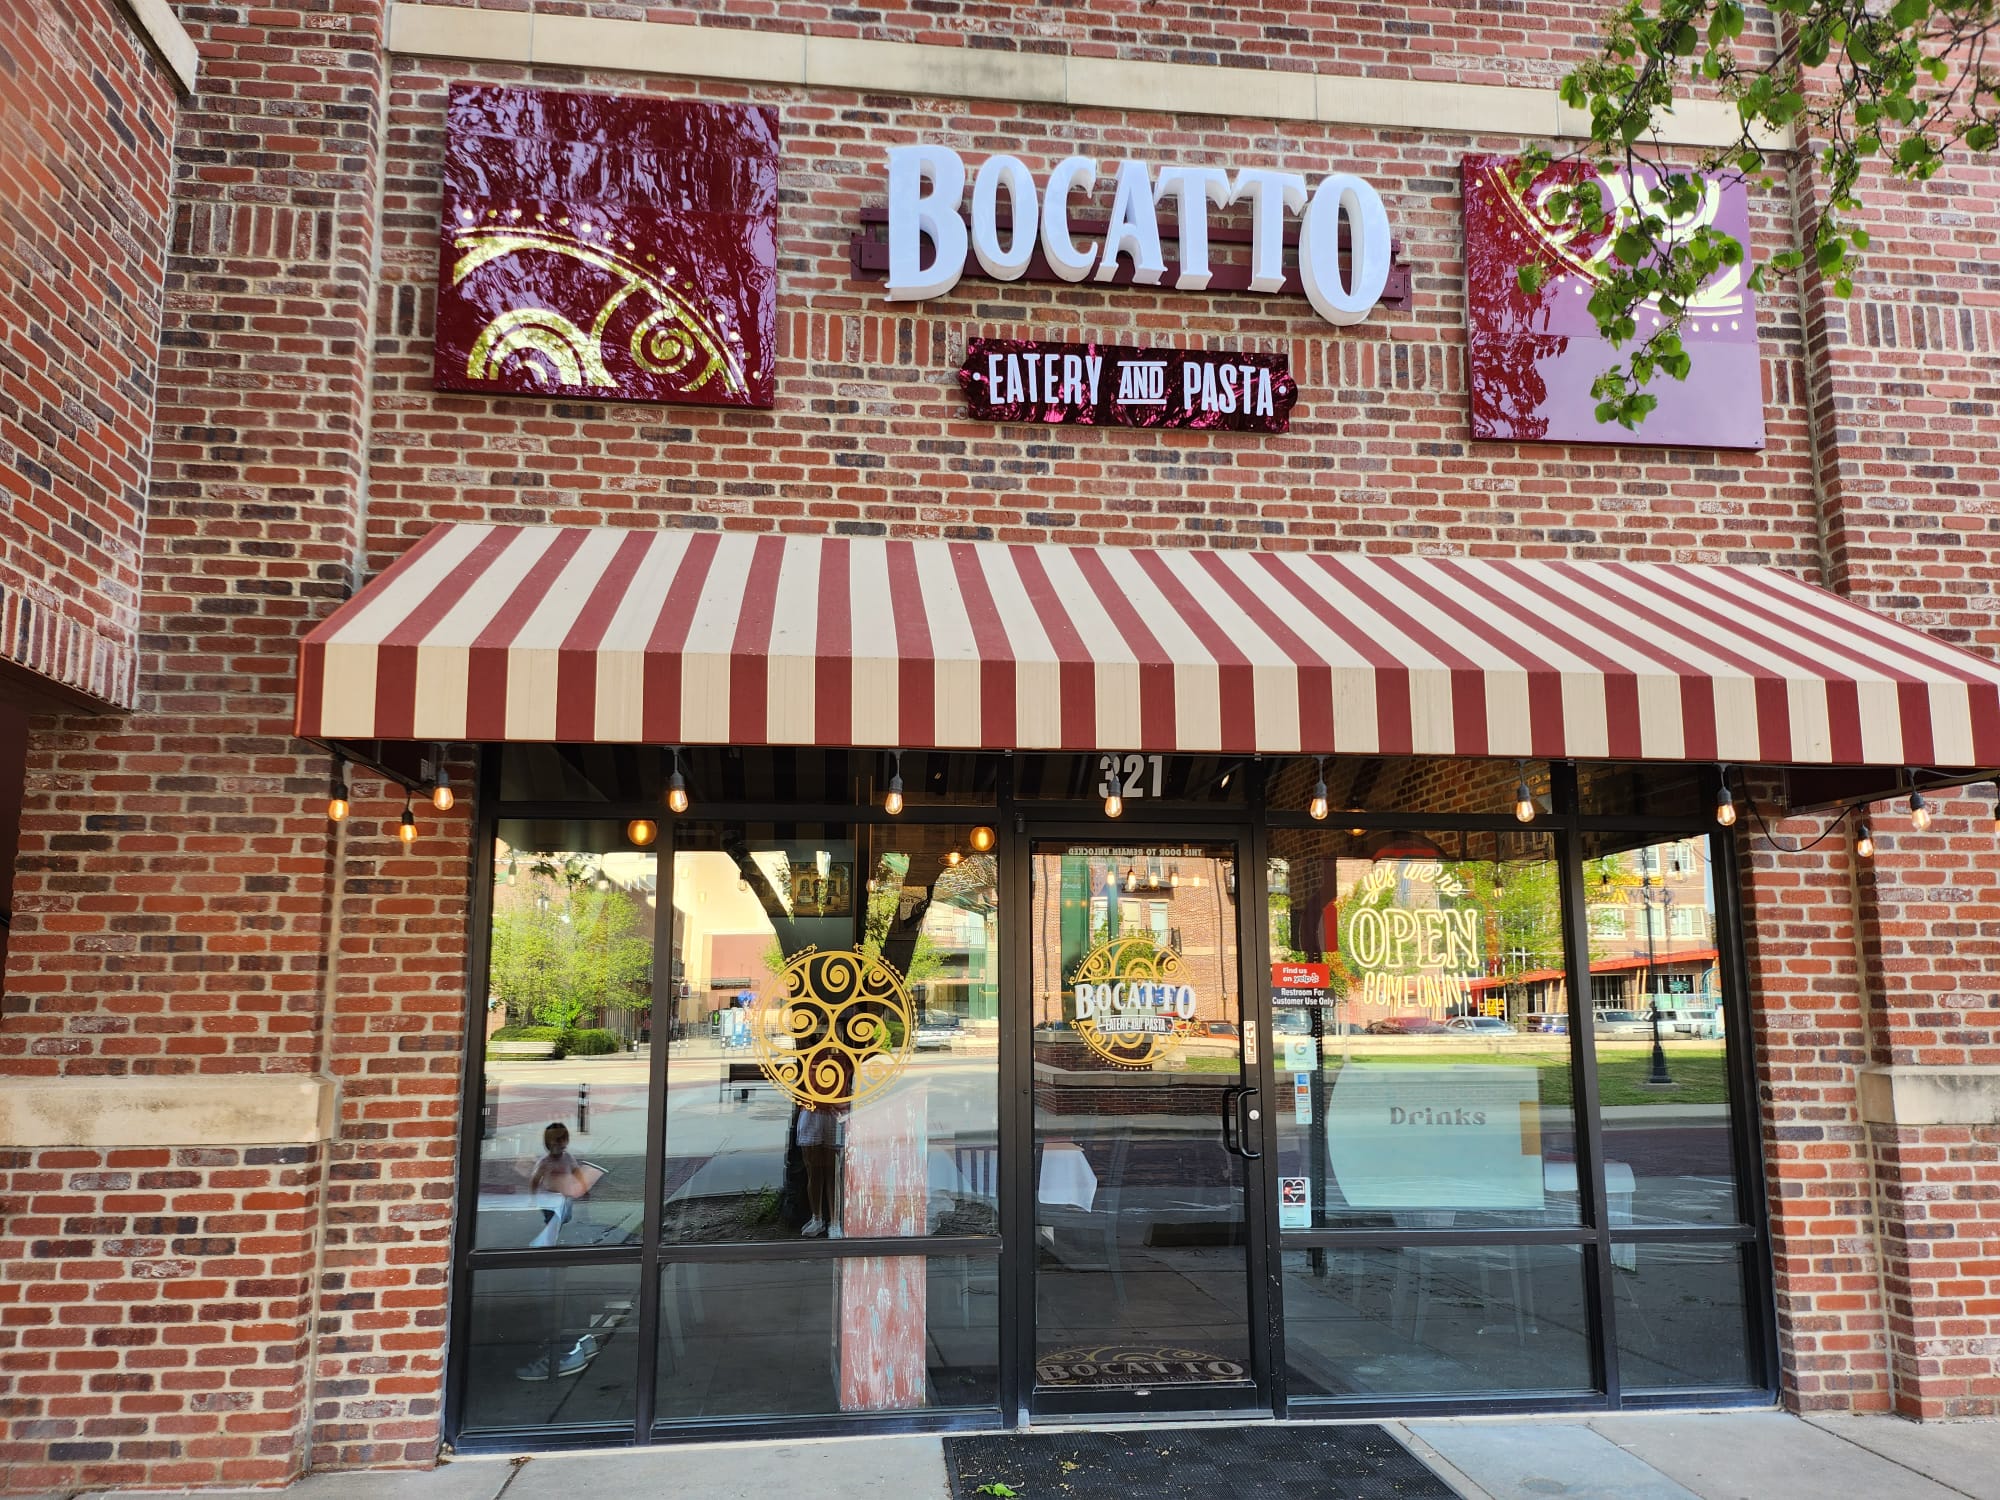 Bocatto Eatery and Pasta 321 N Mead St, Wichita, KS 67202